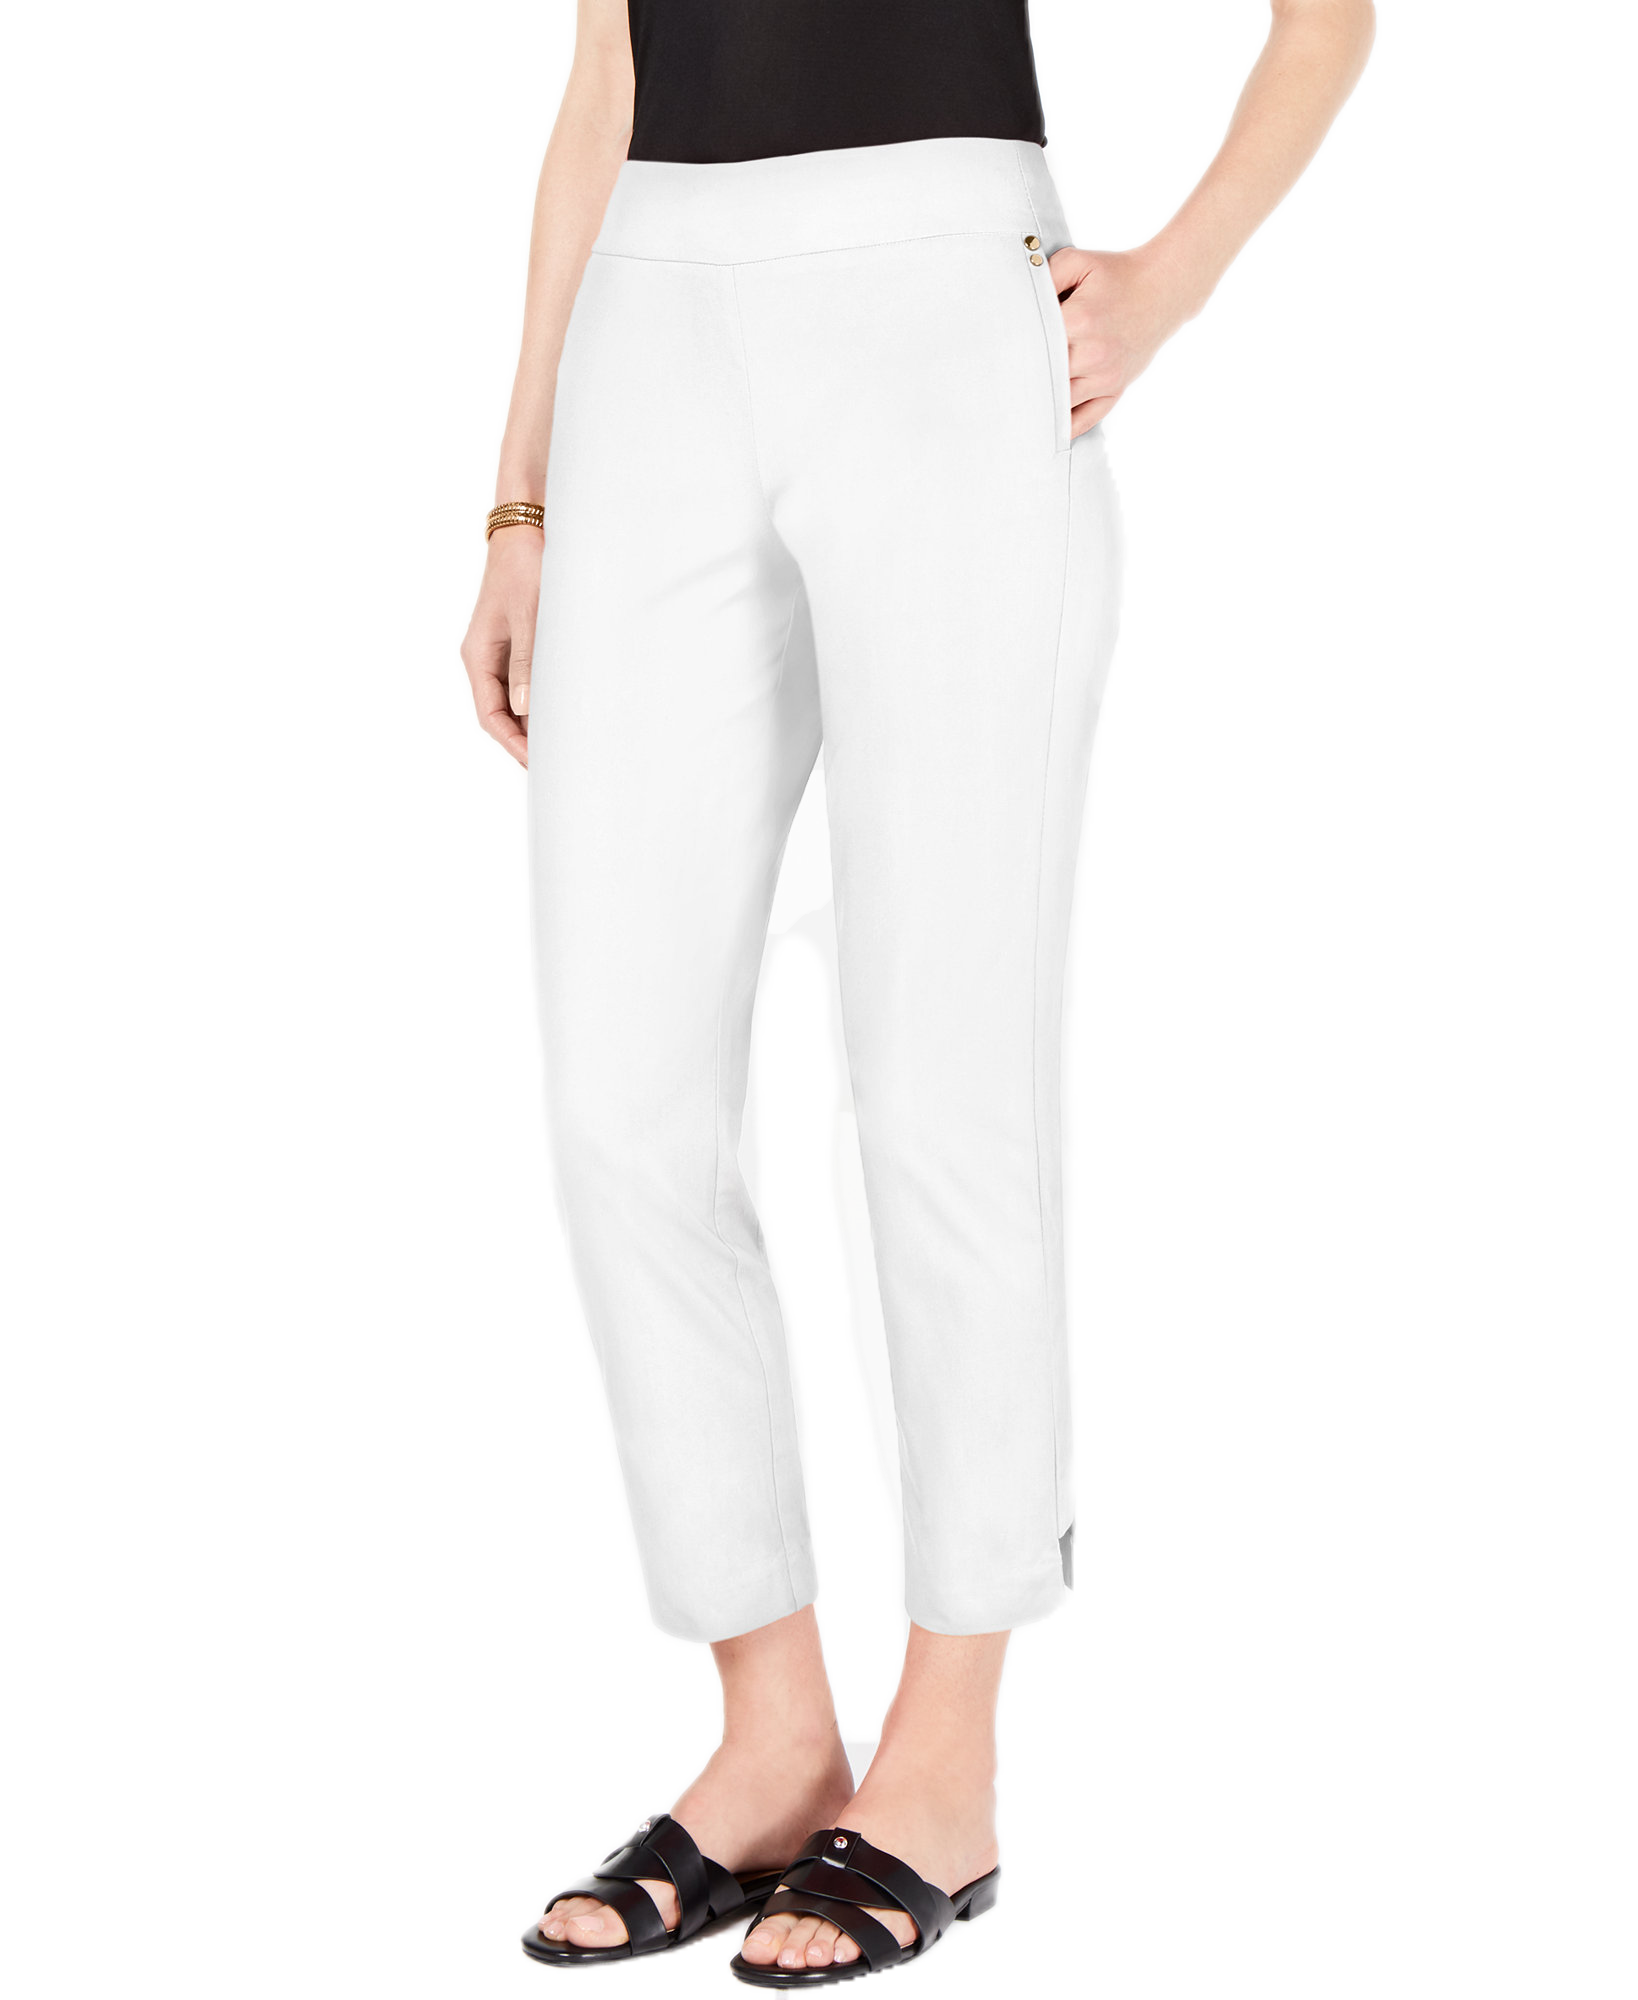 Petite Tummy-Control Pull-On Skinny Pants – Online Warehouse Sale